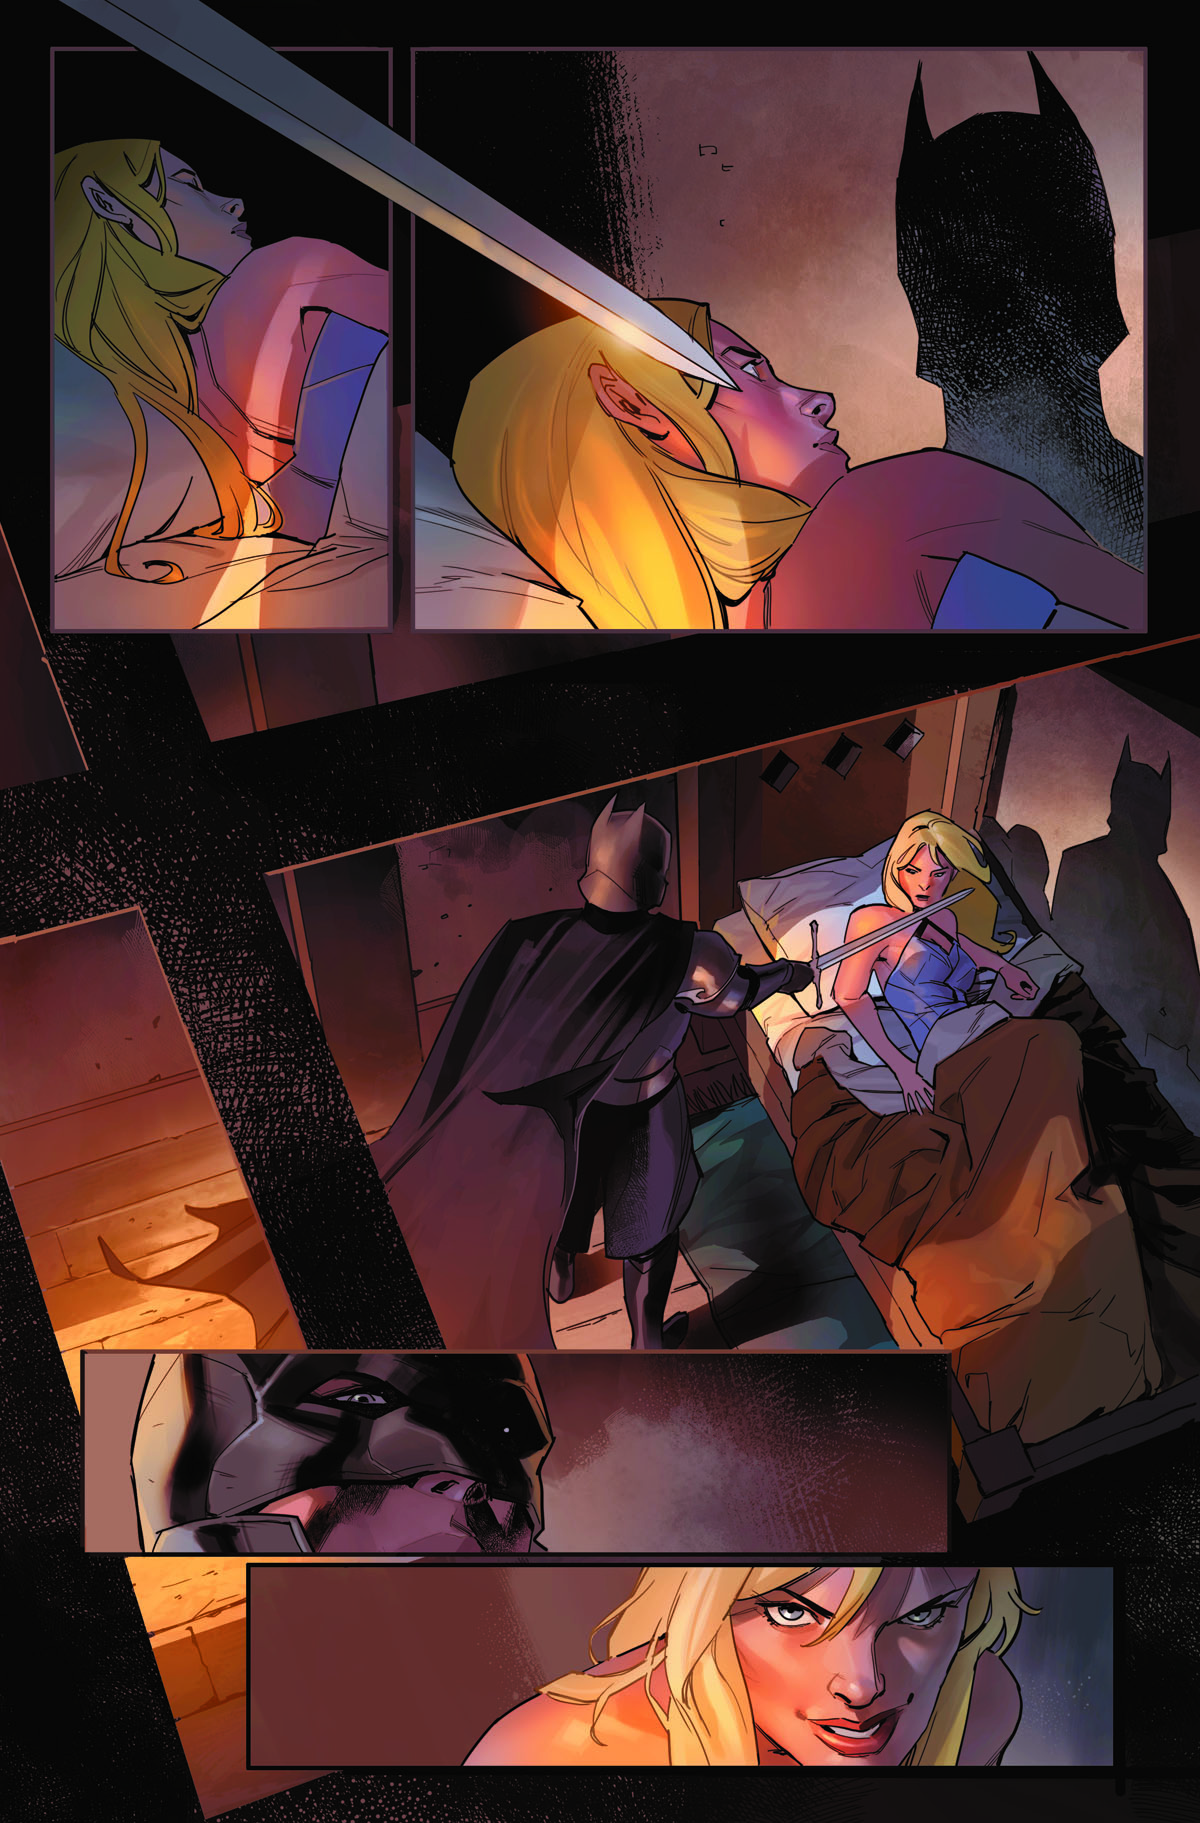 Dark Knights of Steel #1 preview page 4